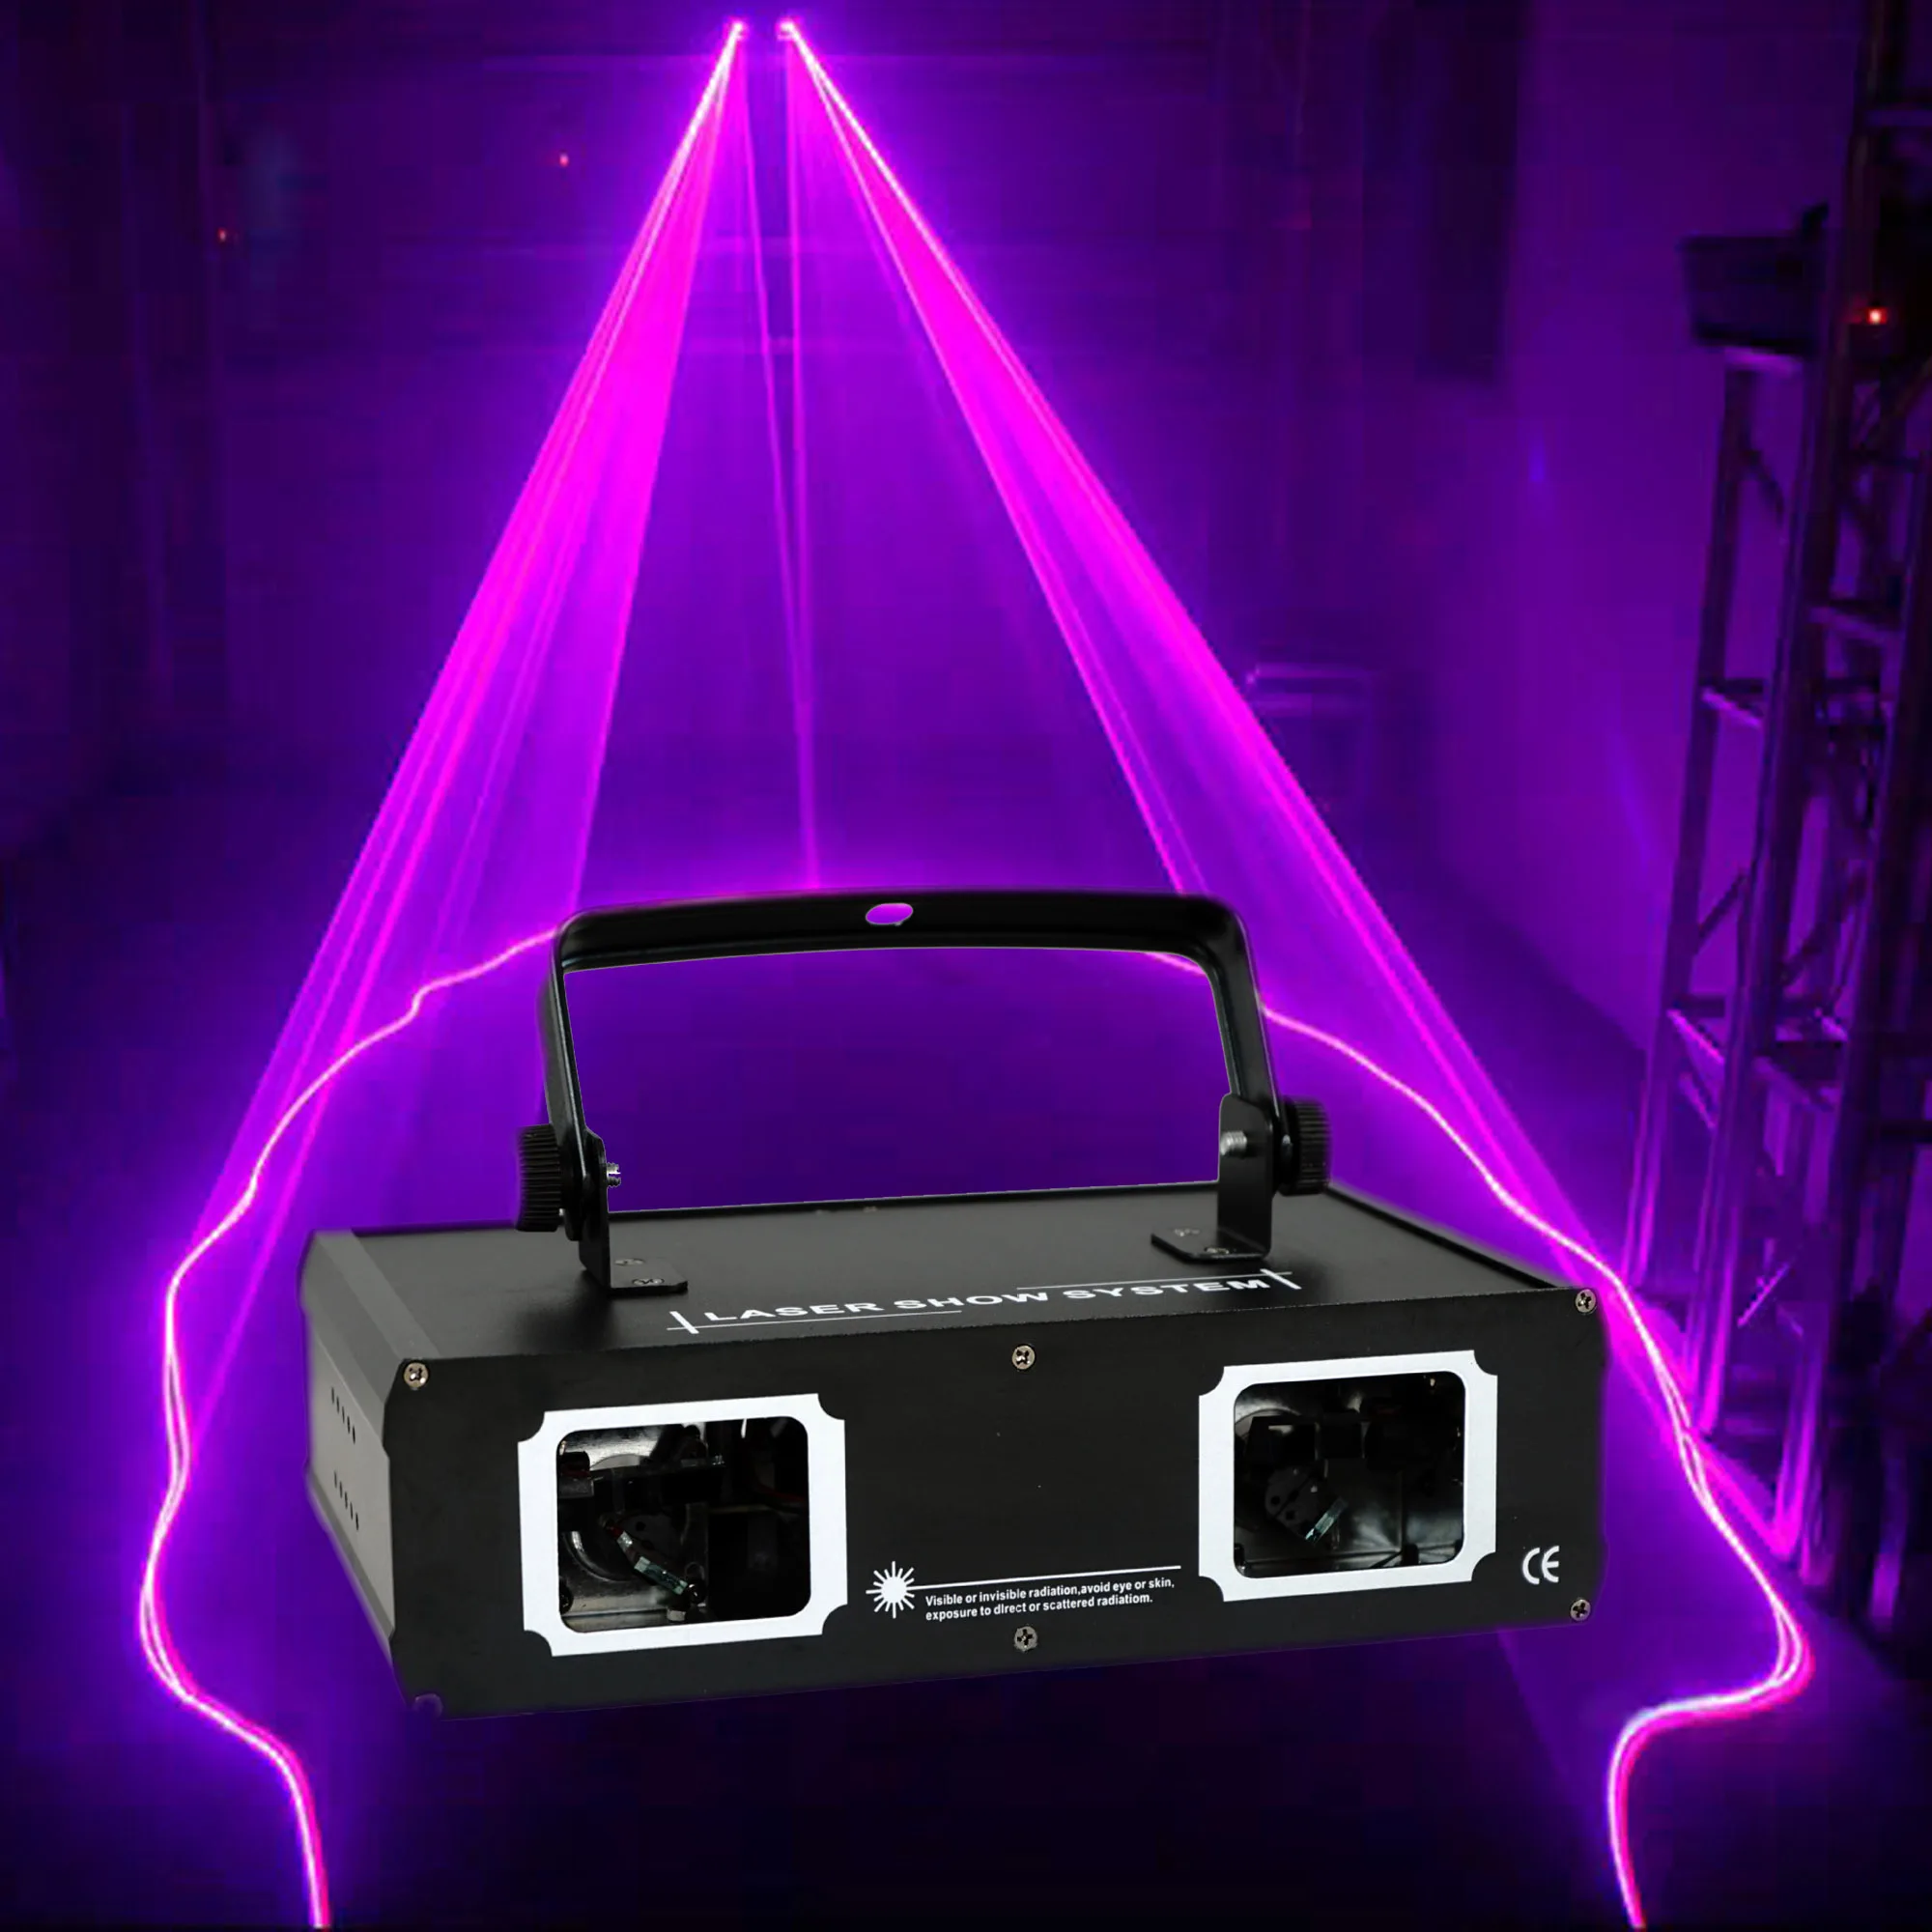 2 lens RGB beam laser projector lamp DMX512 professional DJ performance club vacation home bar stage lighting Christmas party